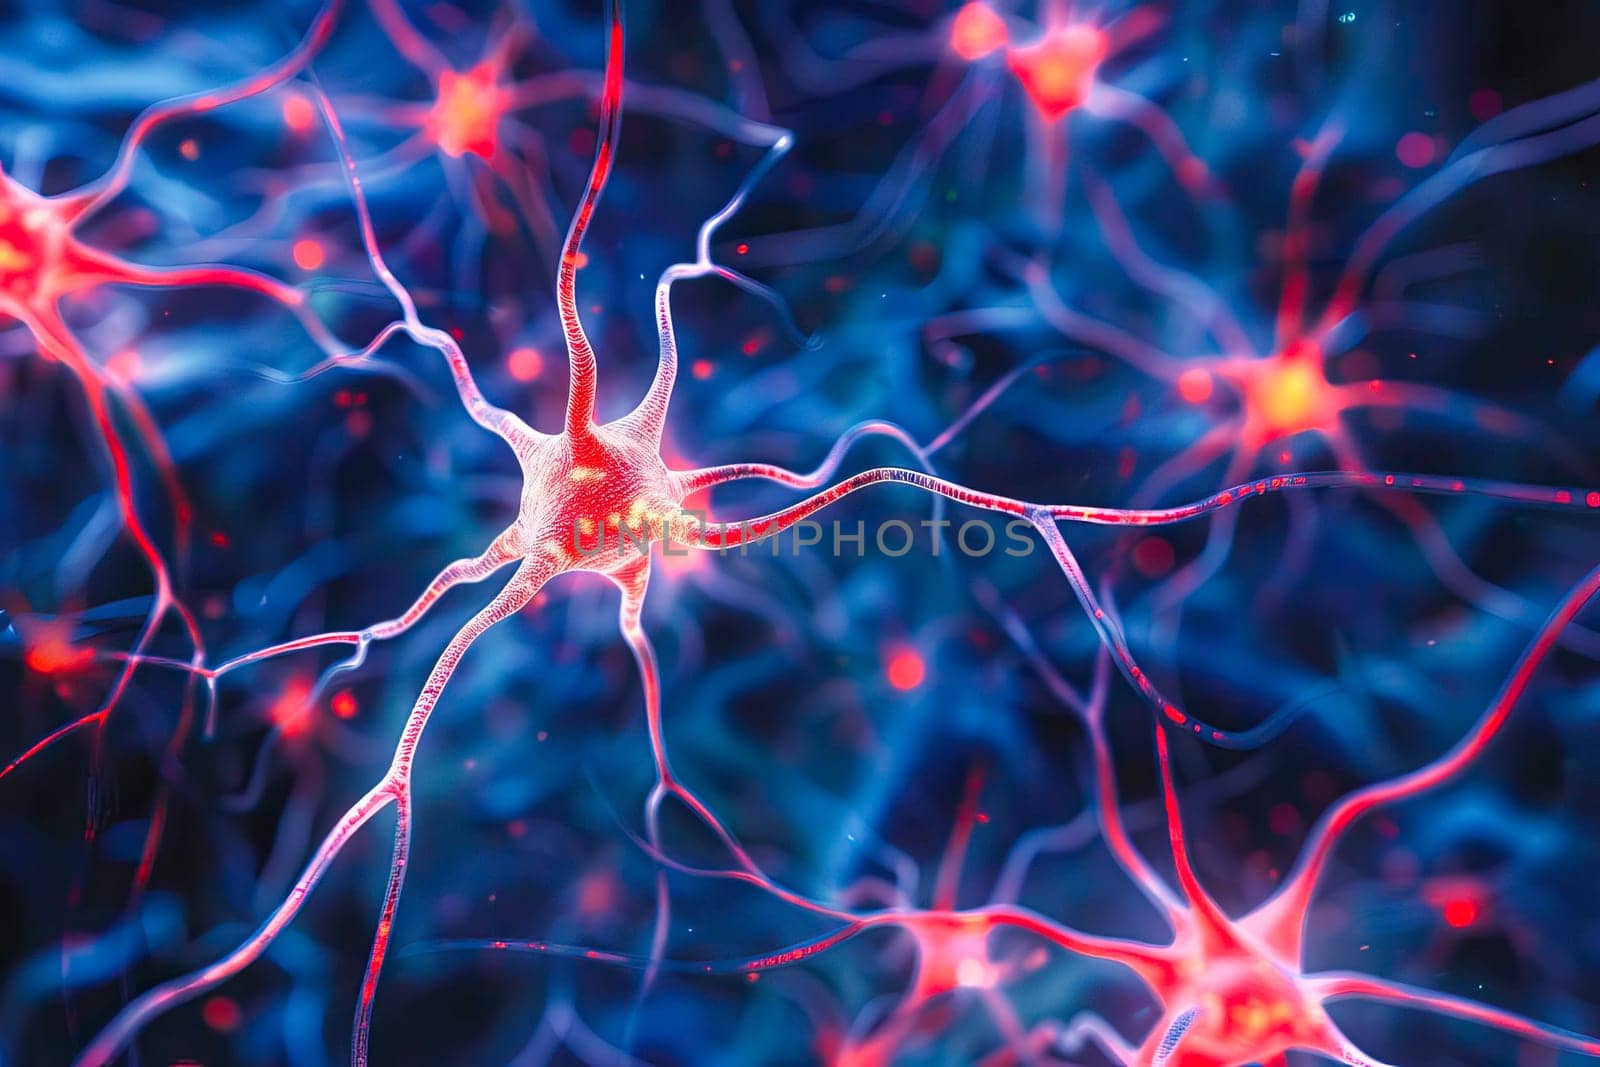 A detailed close-up view of a red and blue human brain with neurons firing by vladimka